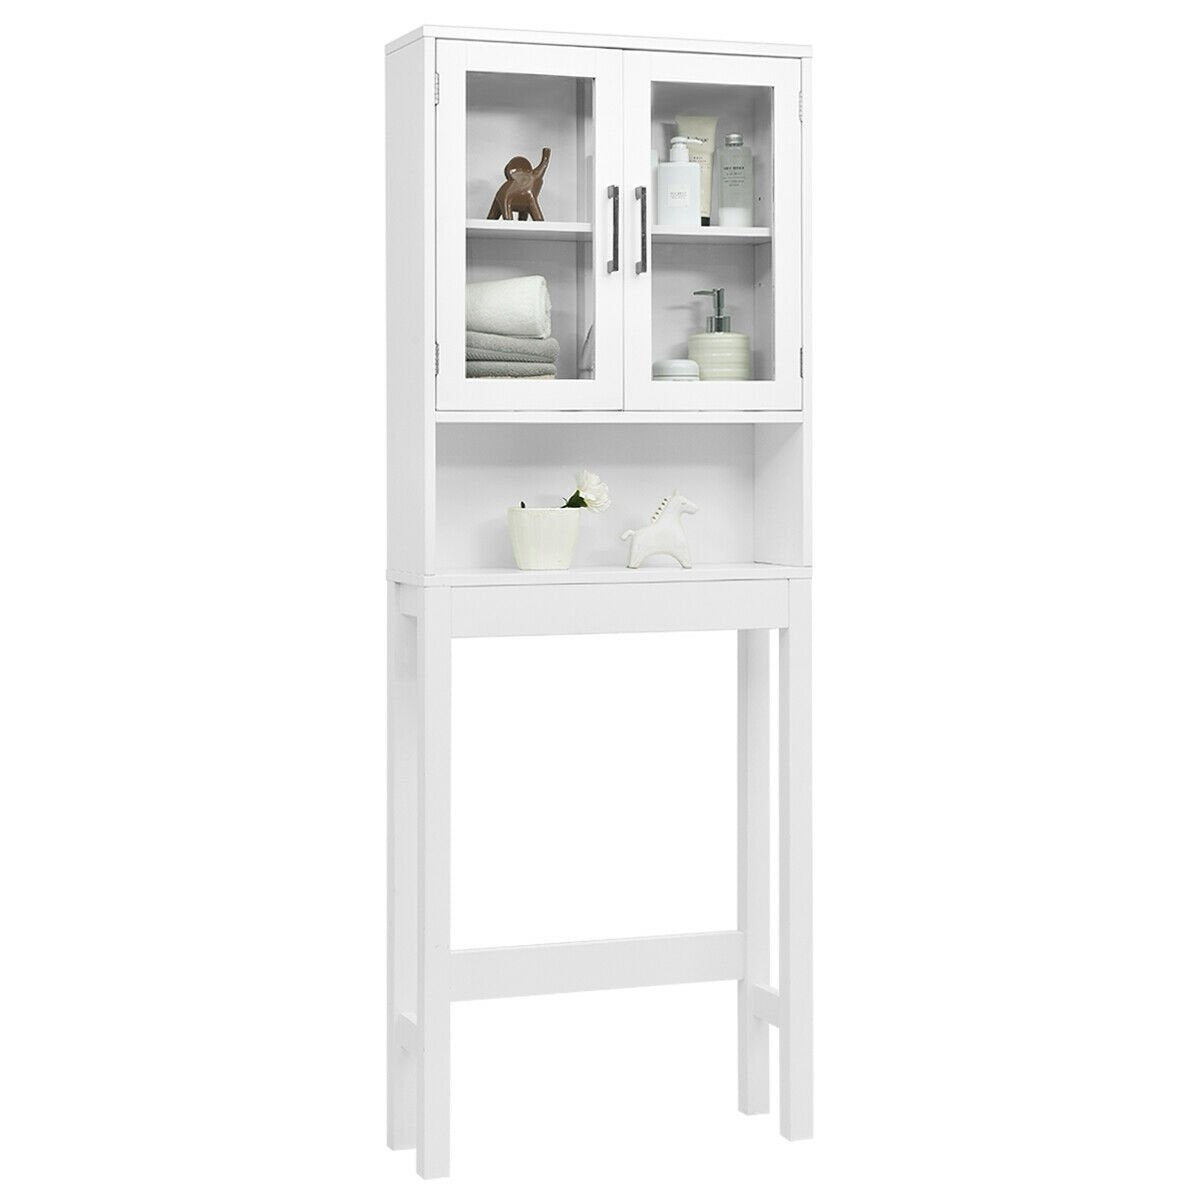 Over the Toilet Storage Cabinet Bathroom Space Saver with Tempered Glass Door, White